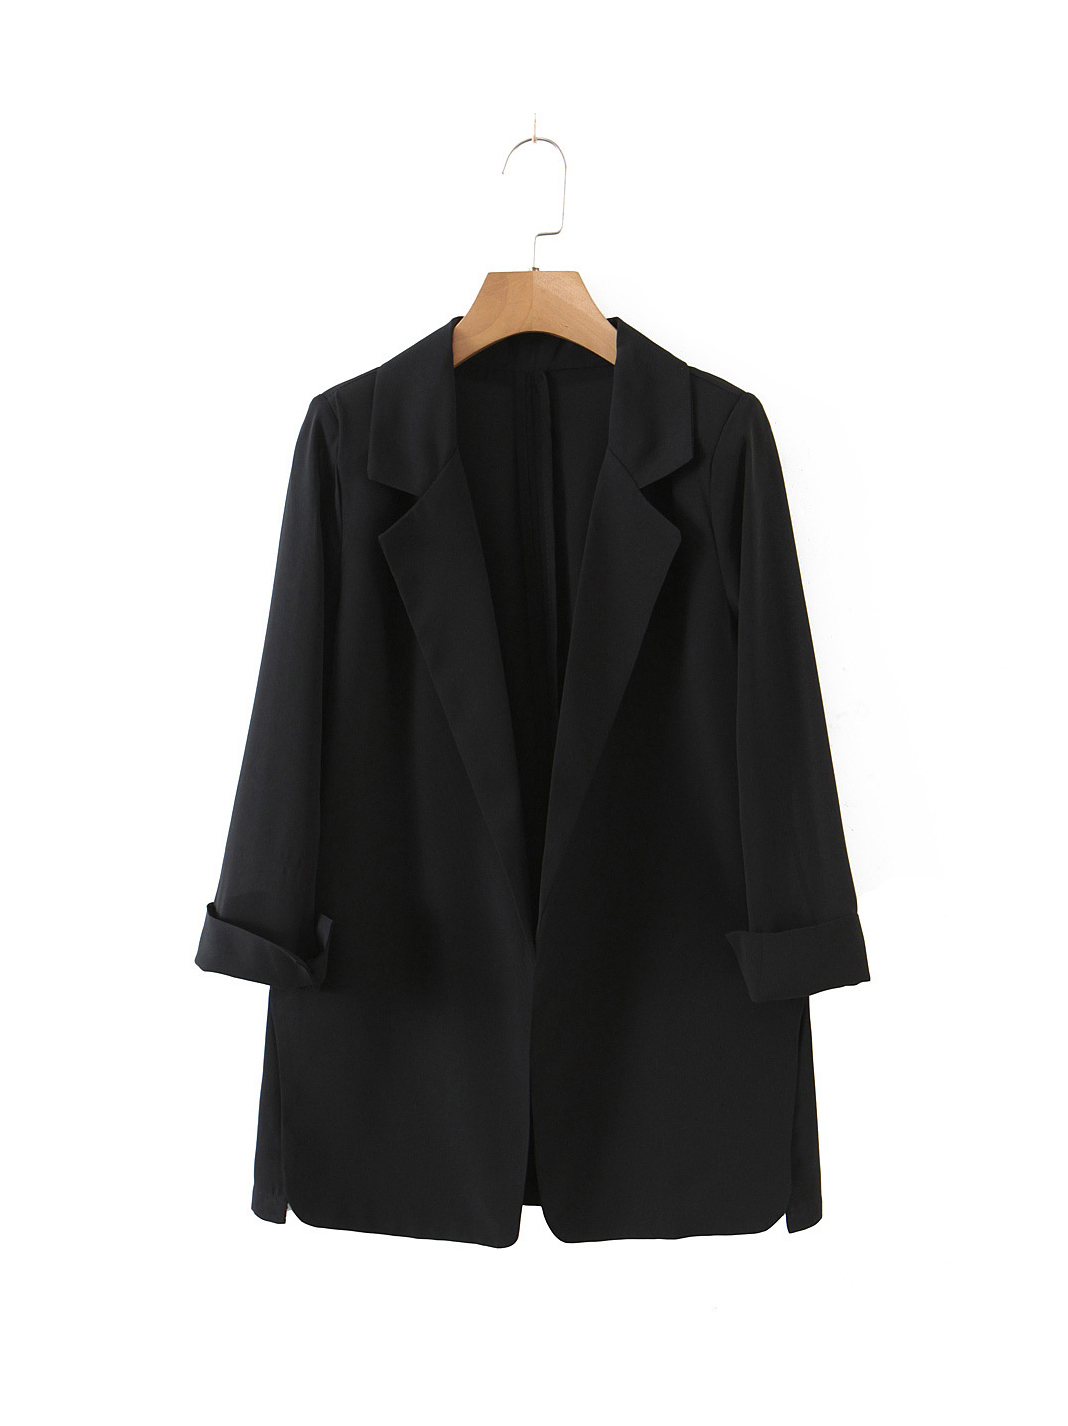 Cheap Outerwear For Woman | Wholesale Blazers, Jackets, Coats ...